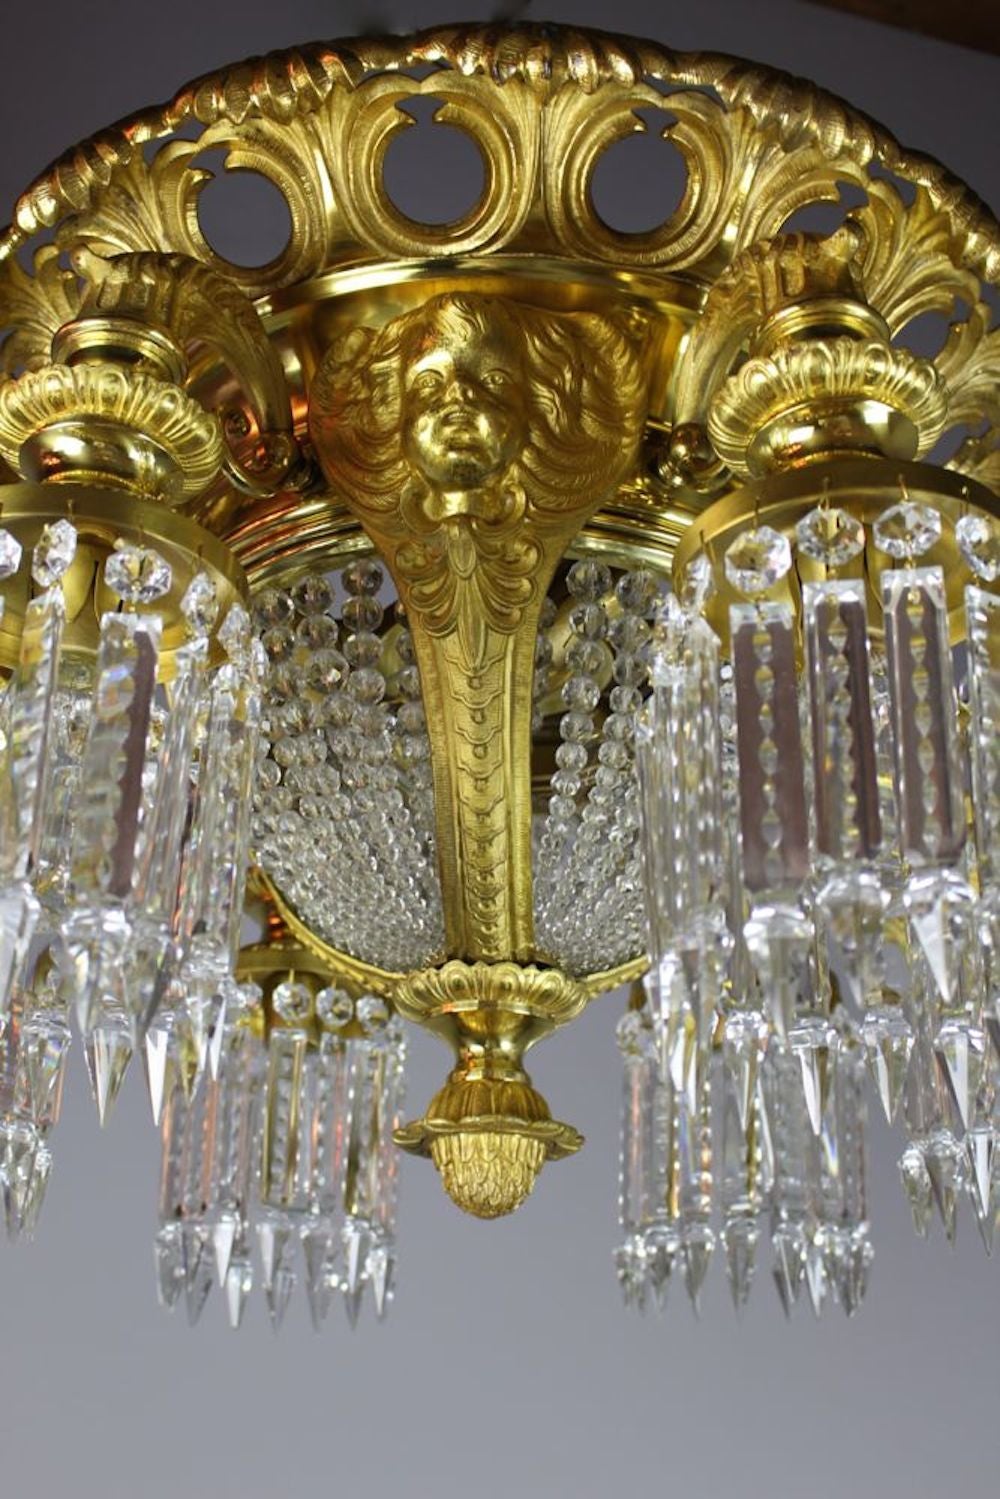 An absolutely exceptional crystal flush-mount light fixture from a Chicago hotel lobby, circa 1910.  Done in the style of Renaissance Revival and using polished Baccarat-Beaded crystals this flush-mount fixture is an absolute showstopper. With four